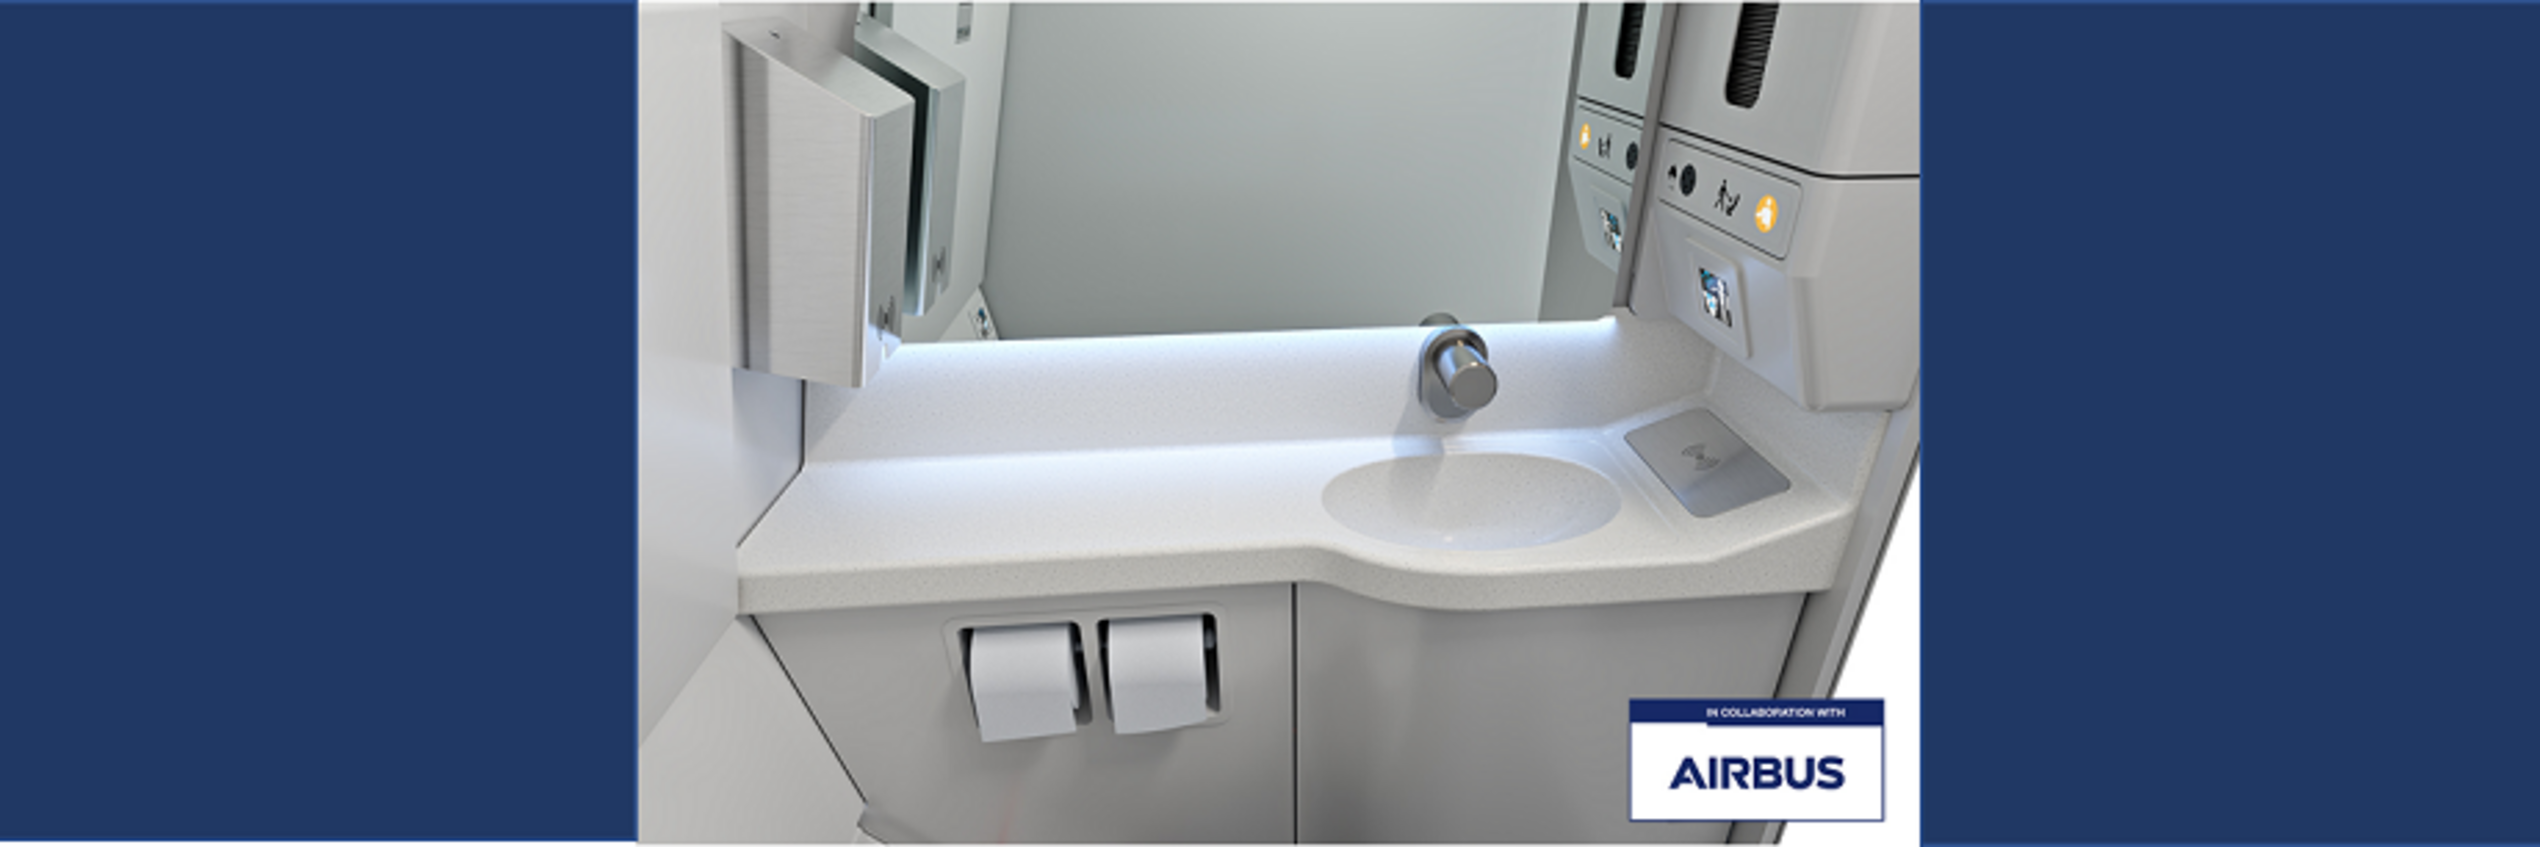 Sales collaboration for new touchless lavatory